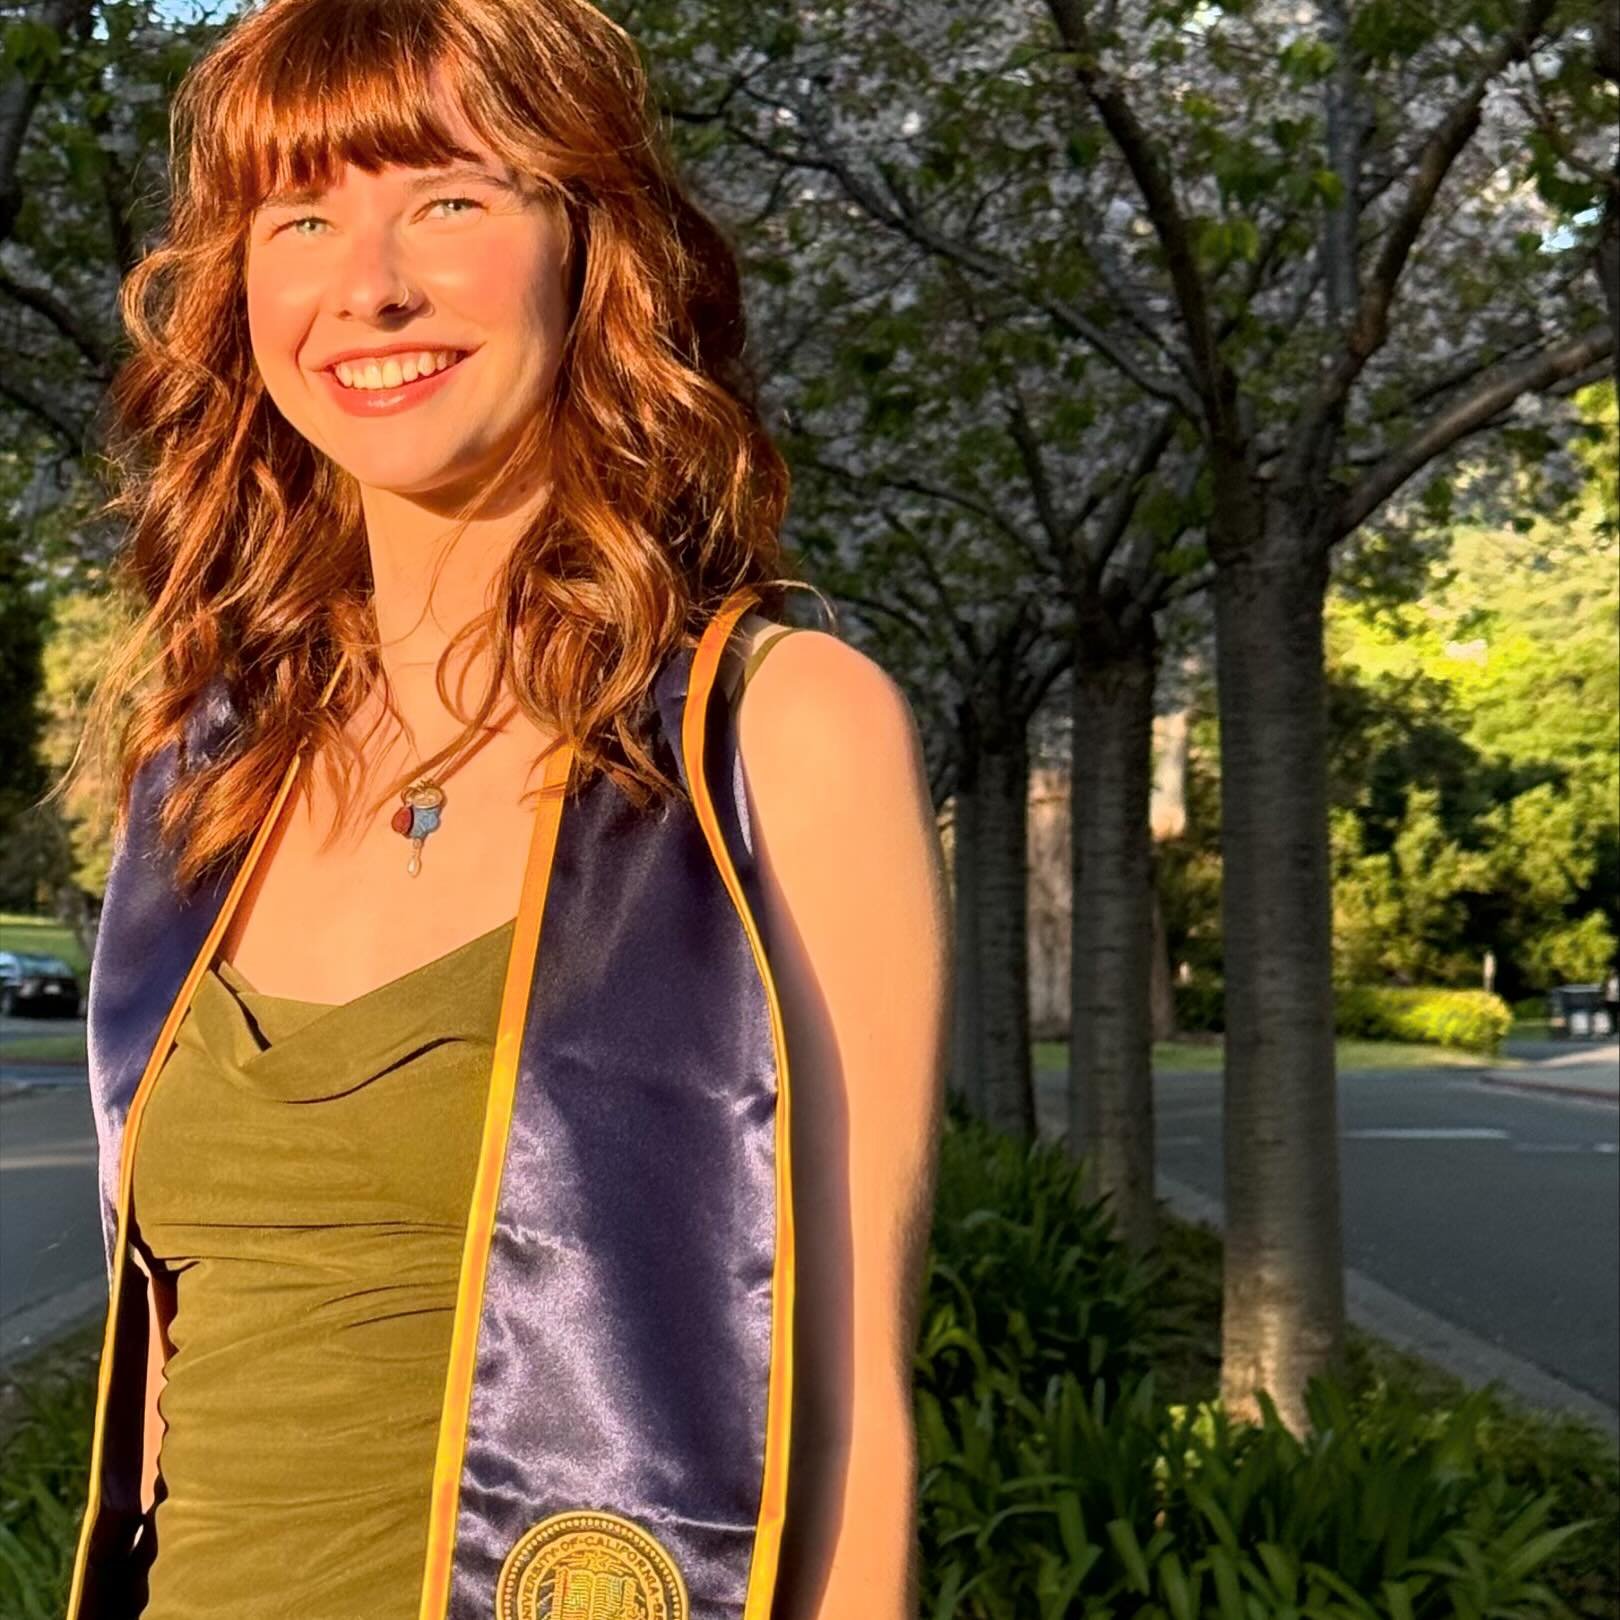 Congratulations to our team member (and my wonderful daughter), Maia Skornicka Mazur, on her graduation from the University of California, Berkeley!  Maia remained an integral part of our design team while also giving her full dedication to her studi